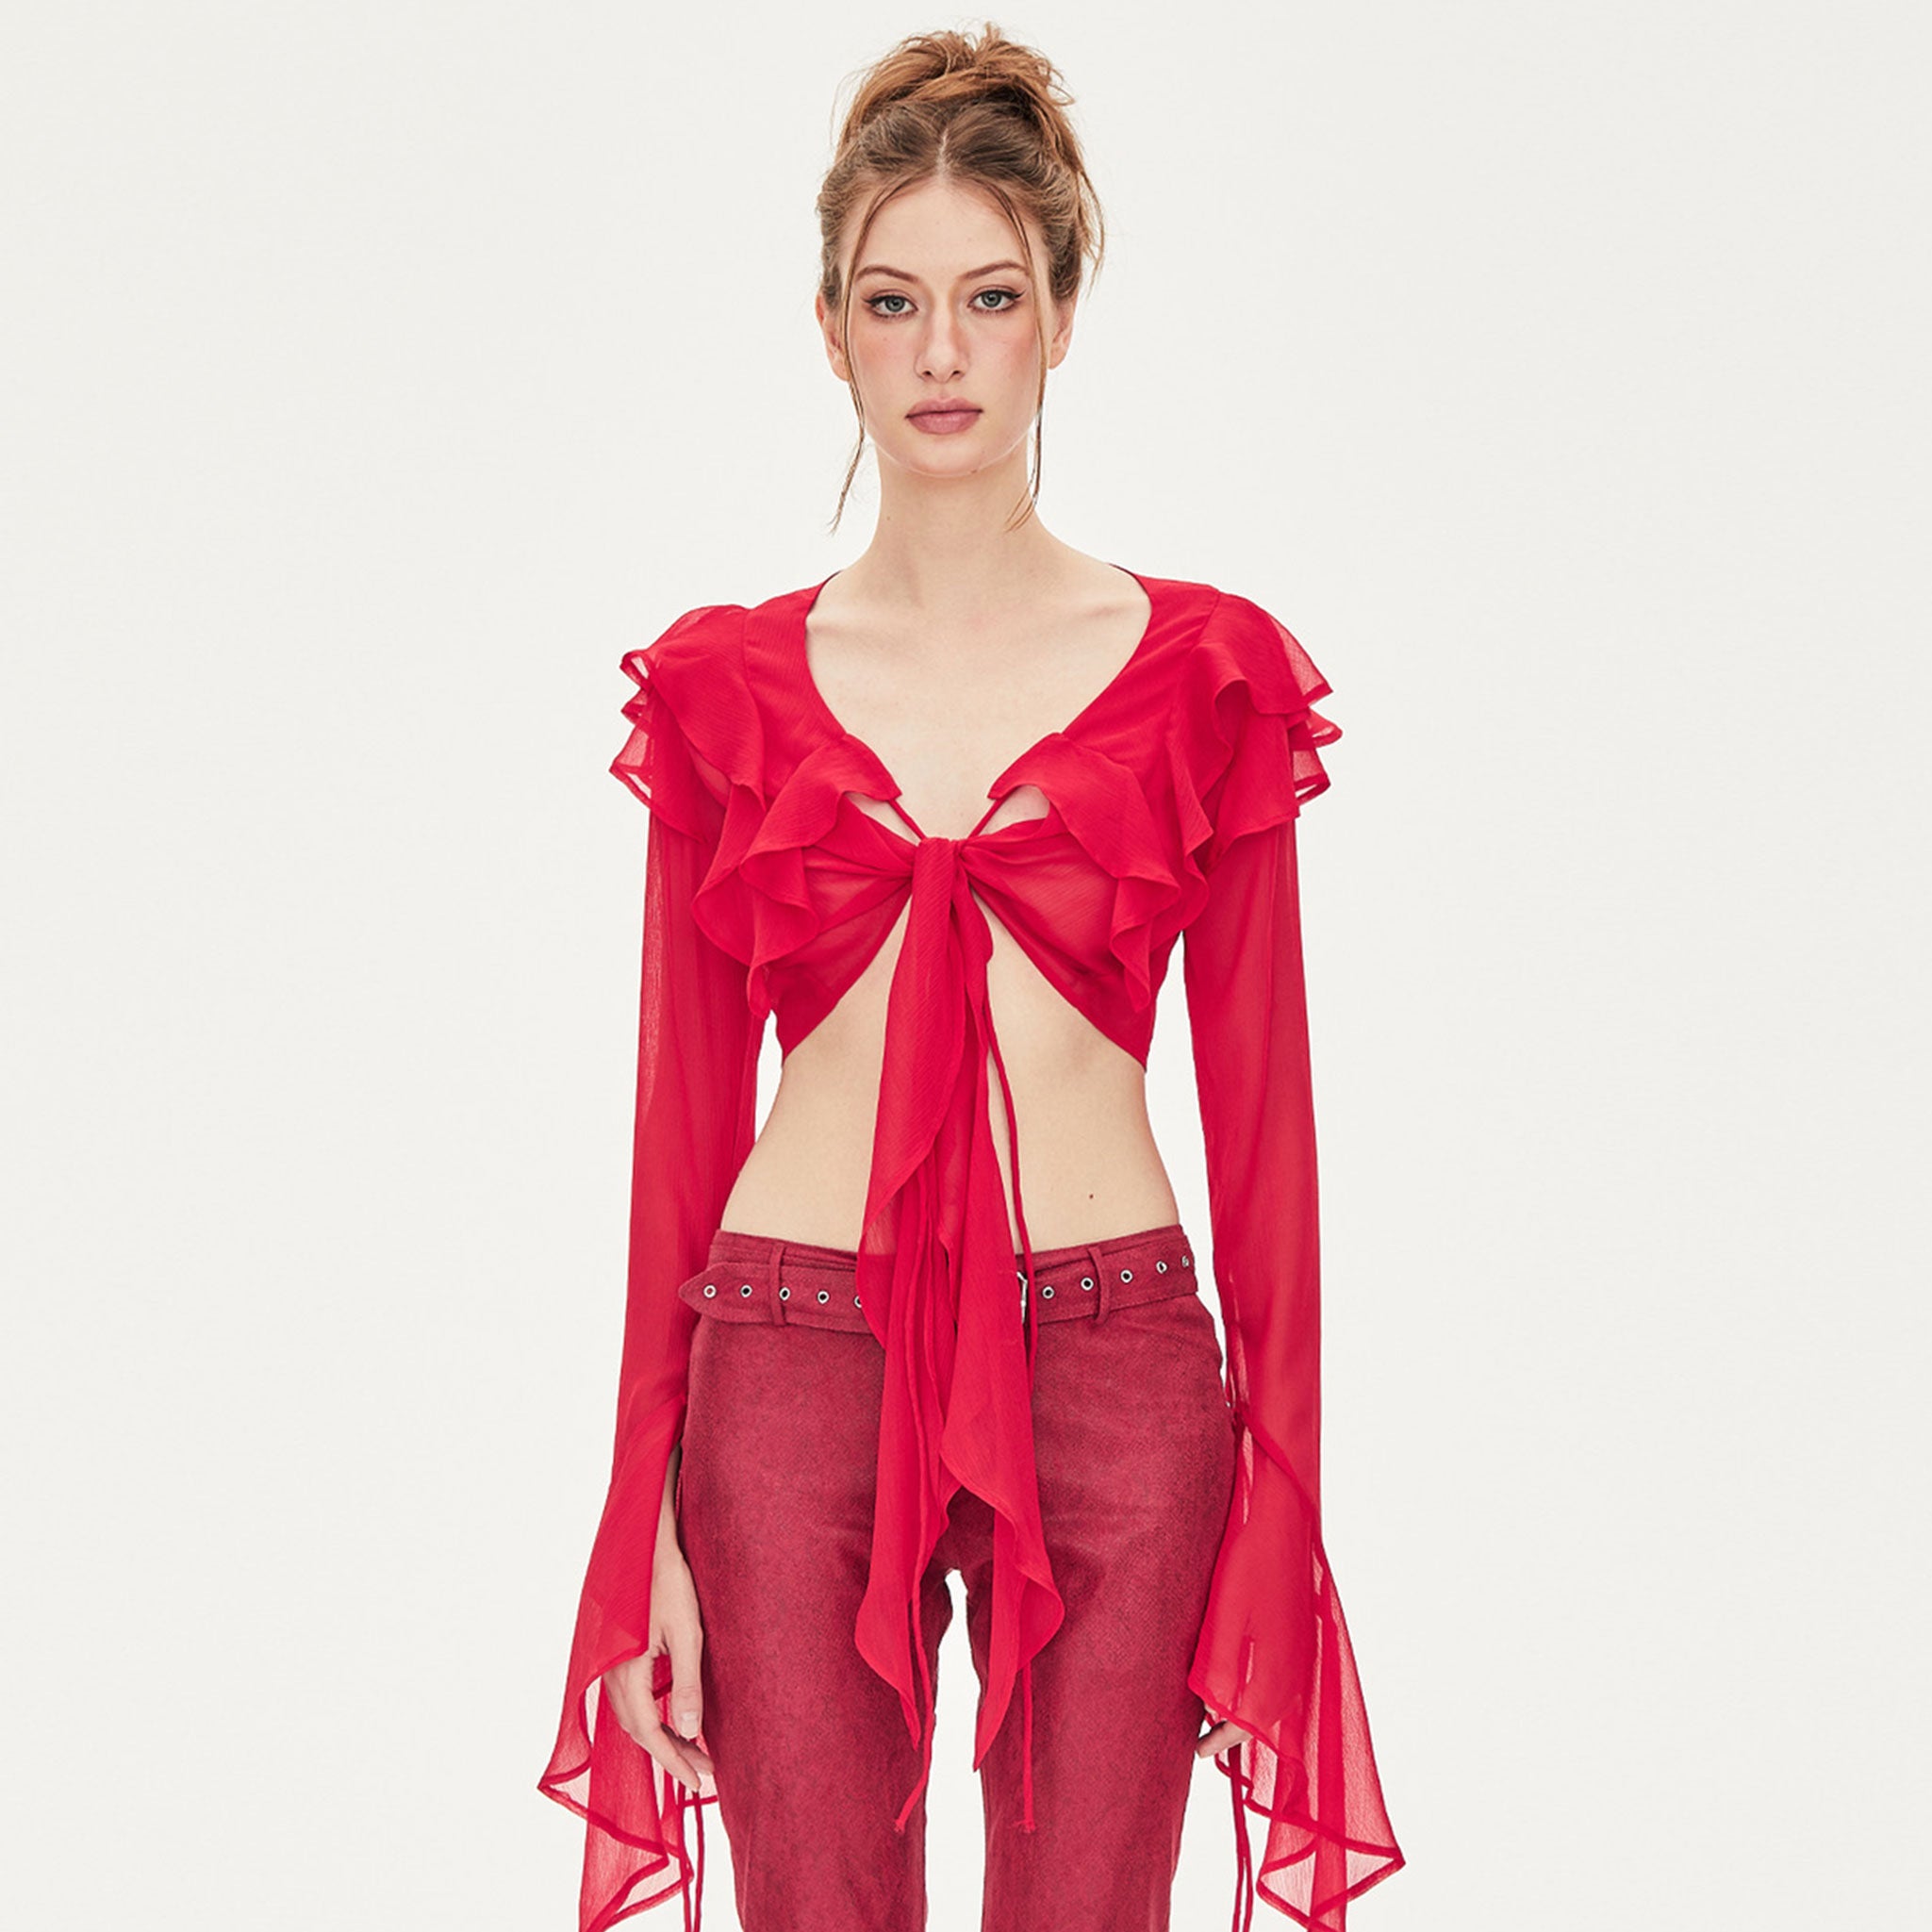 Kelly V-neck Ruffled Chiffon Crop Blouse in Red – Pann